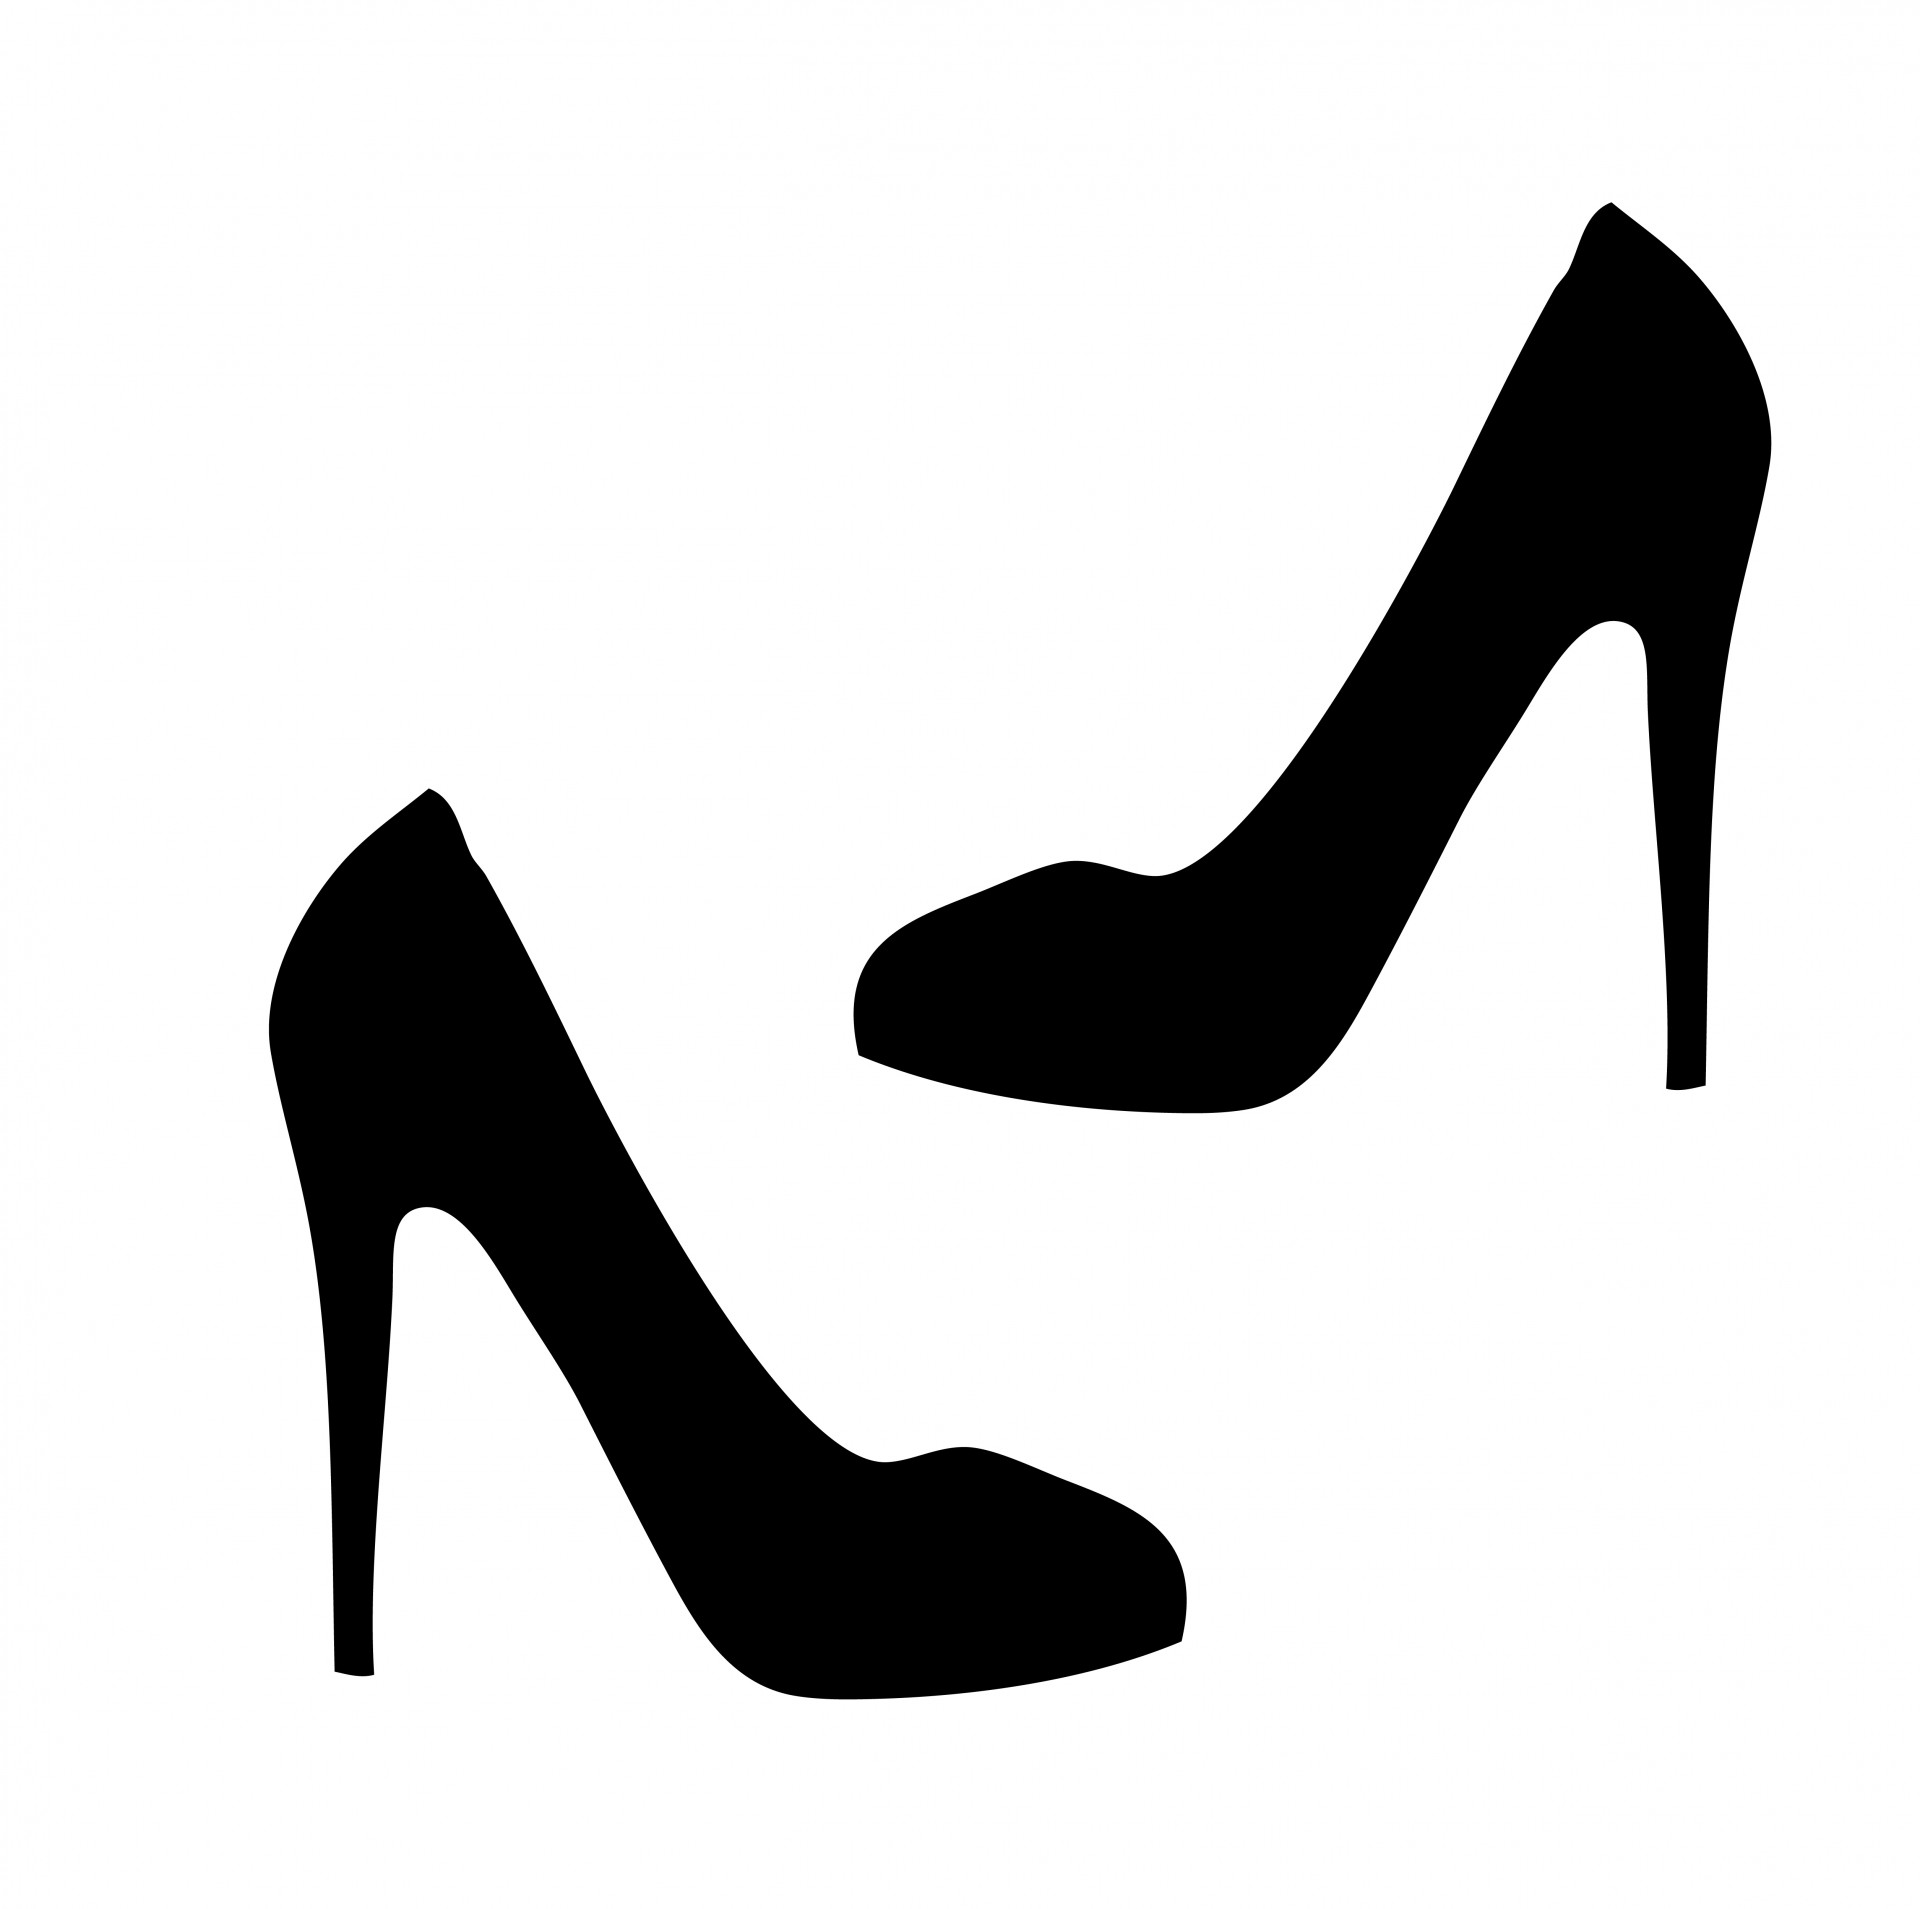 Black ladies stiletto high heeled shoes clipart